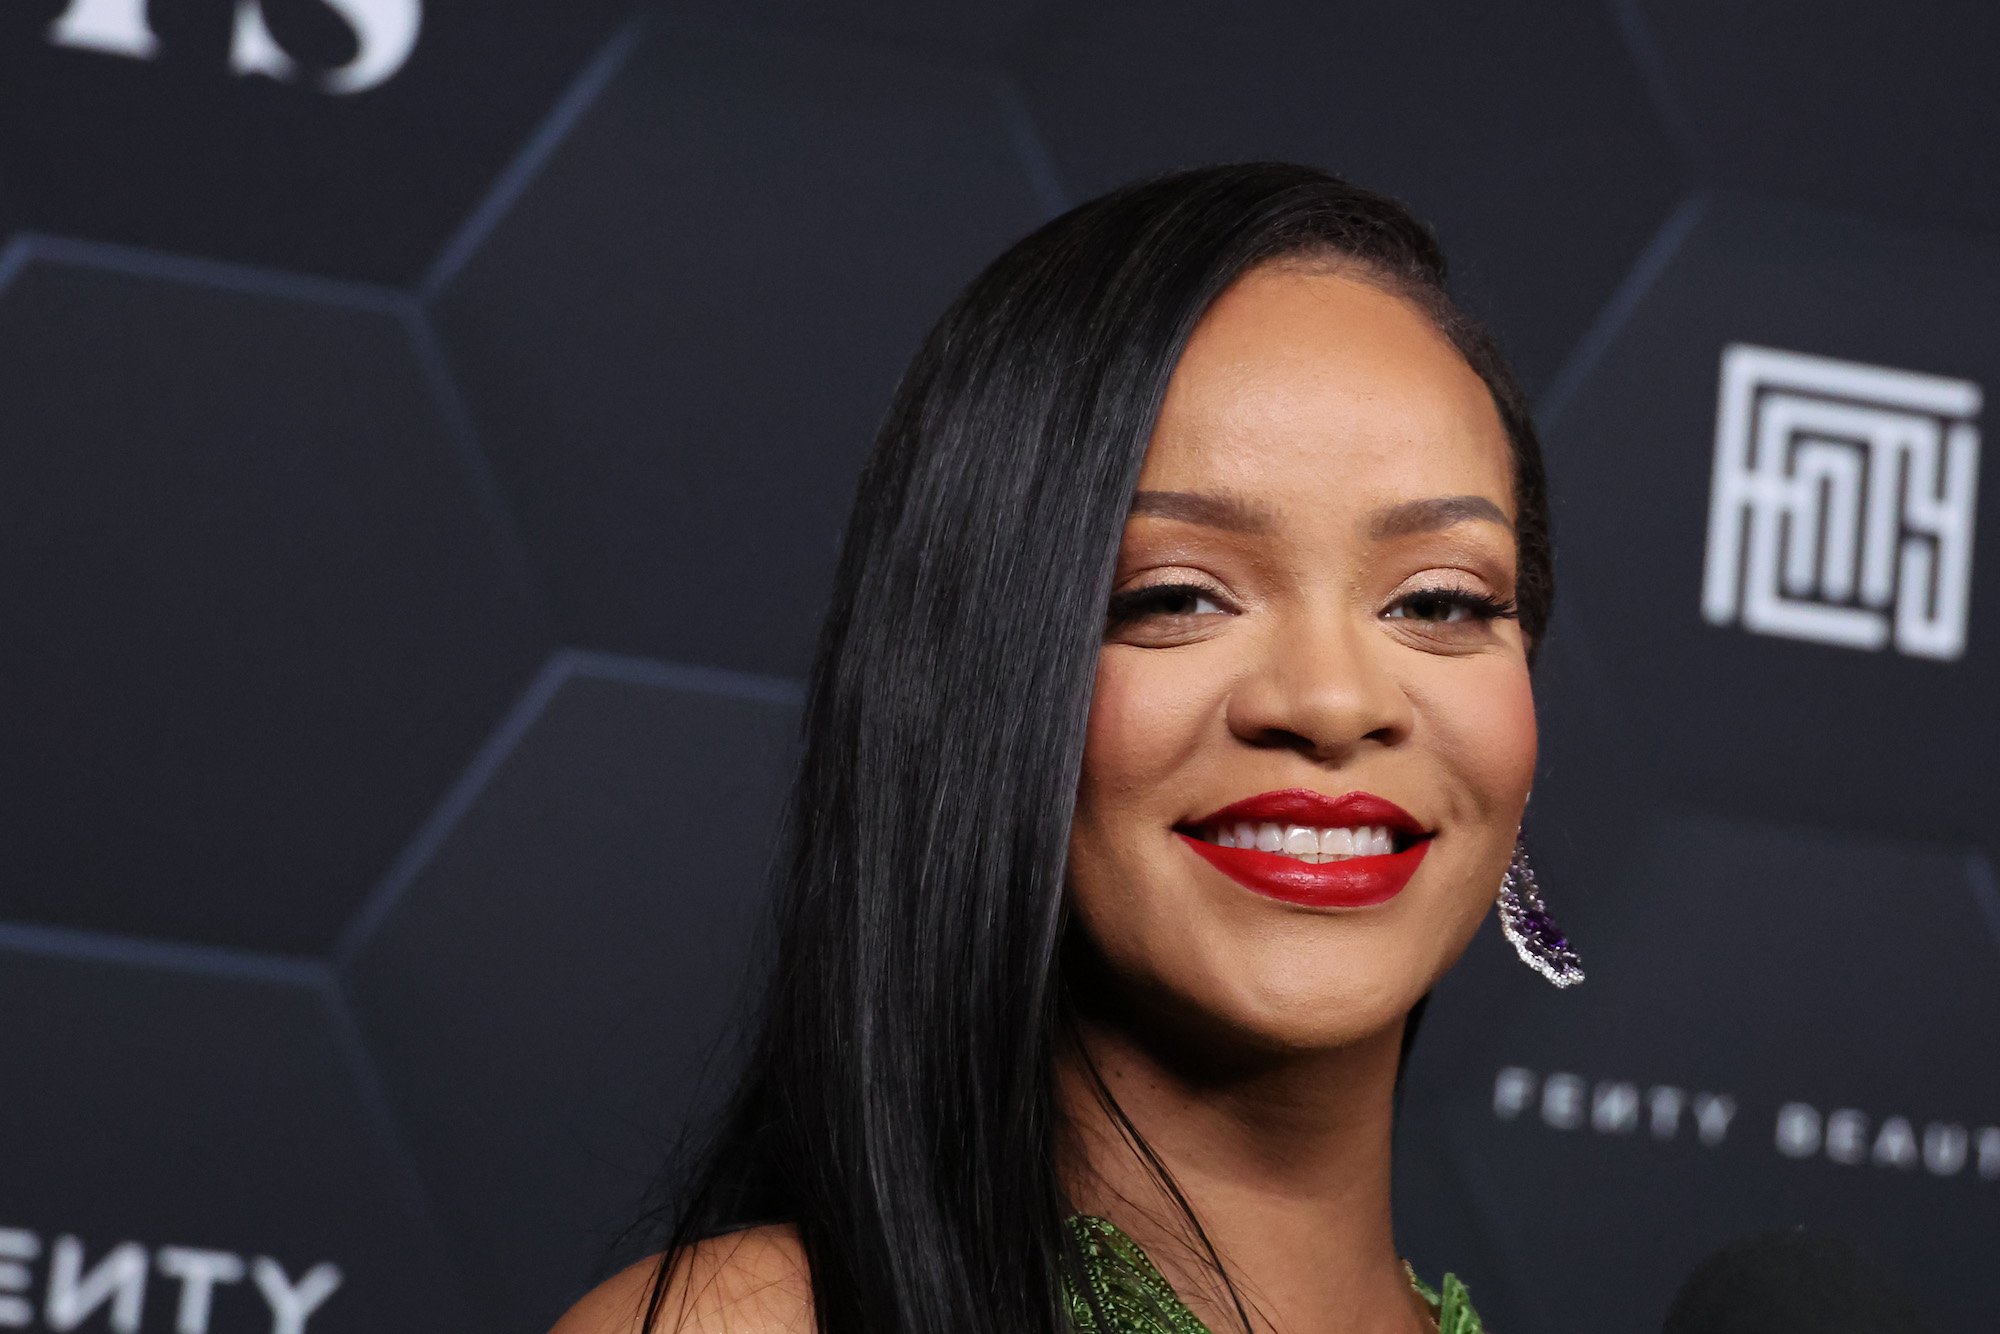 Rihanna Is Reportedly Considering Bringing Out Collaborators Like Drake and Jay-Z At the Super Bowl Halftime Show